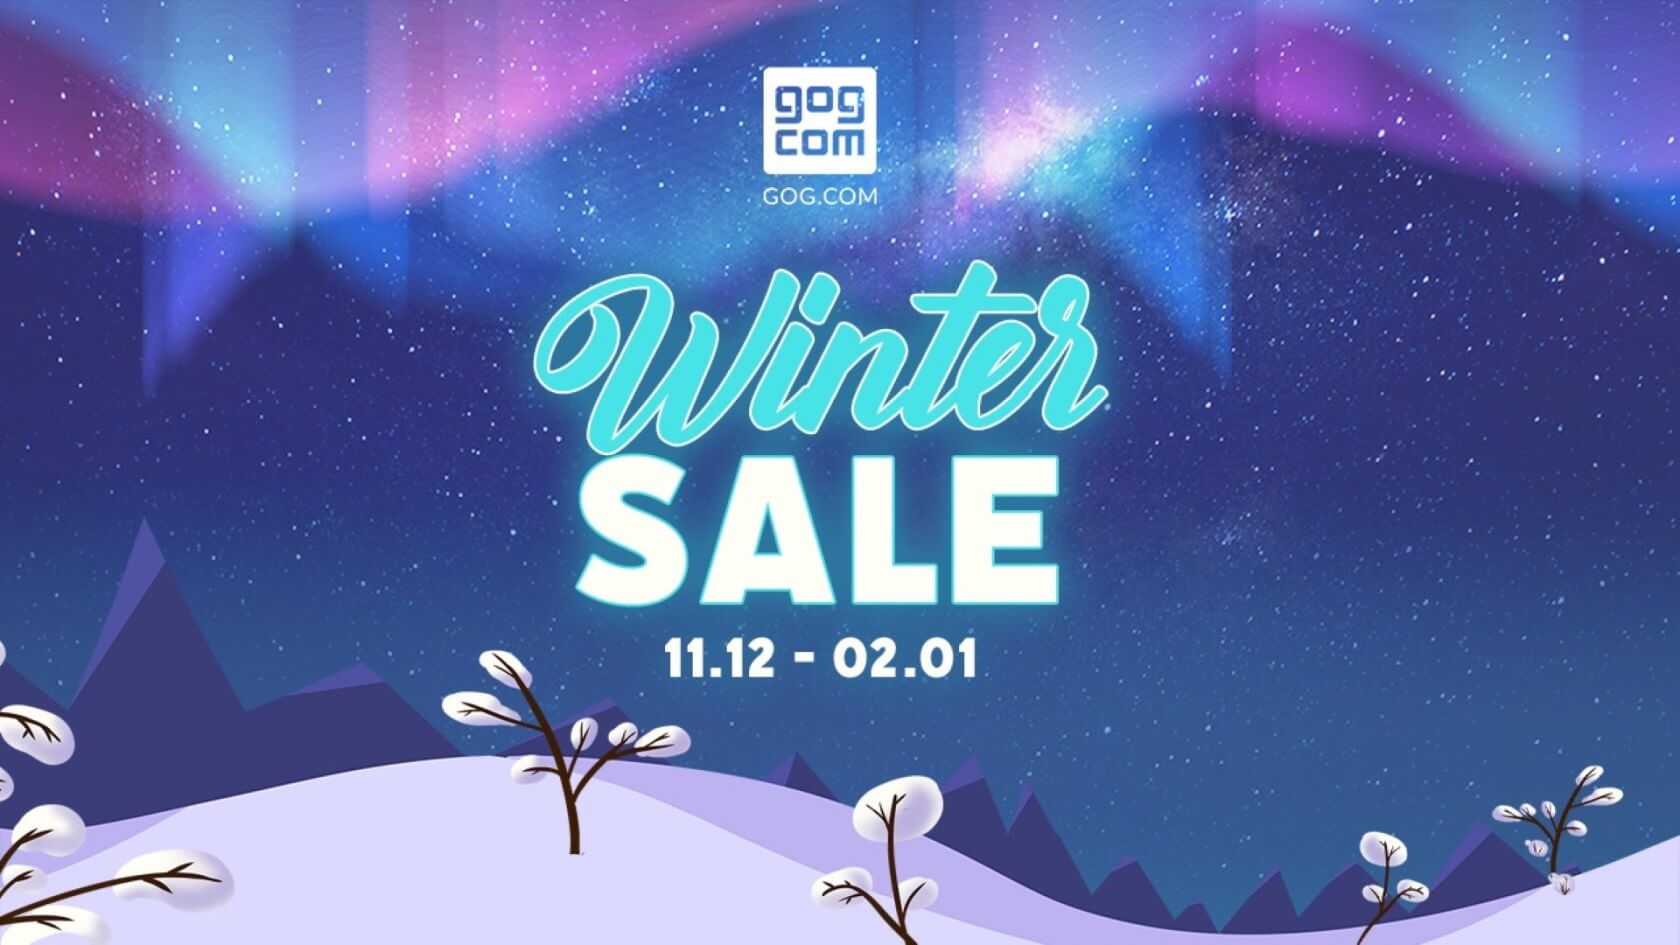 Grab Wasteland 2 for free and enjoy steep discounts on over 2,500 games during GOG's Winter Sale